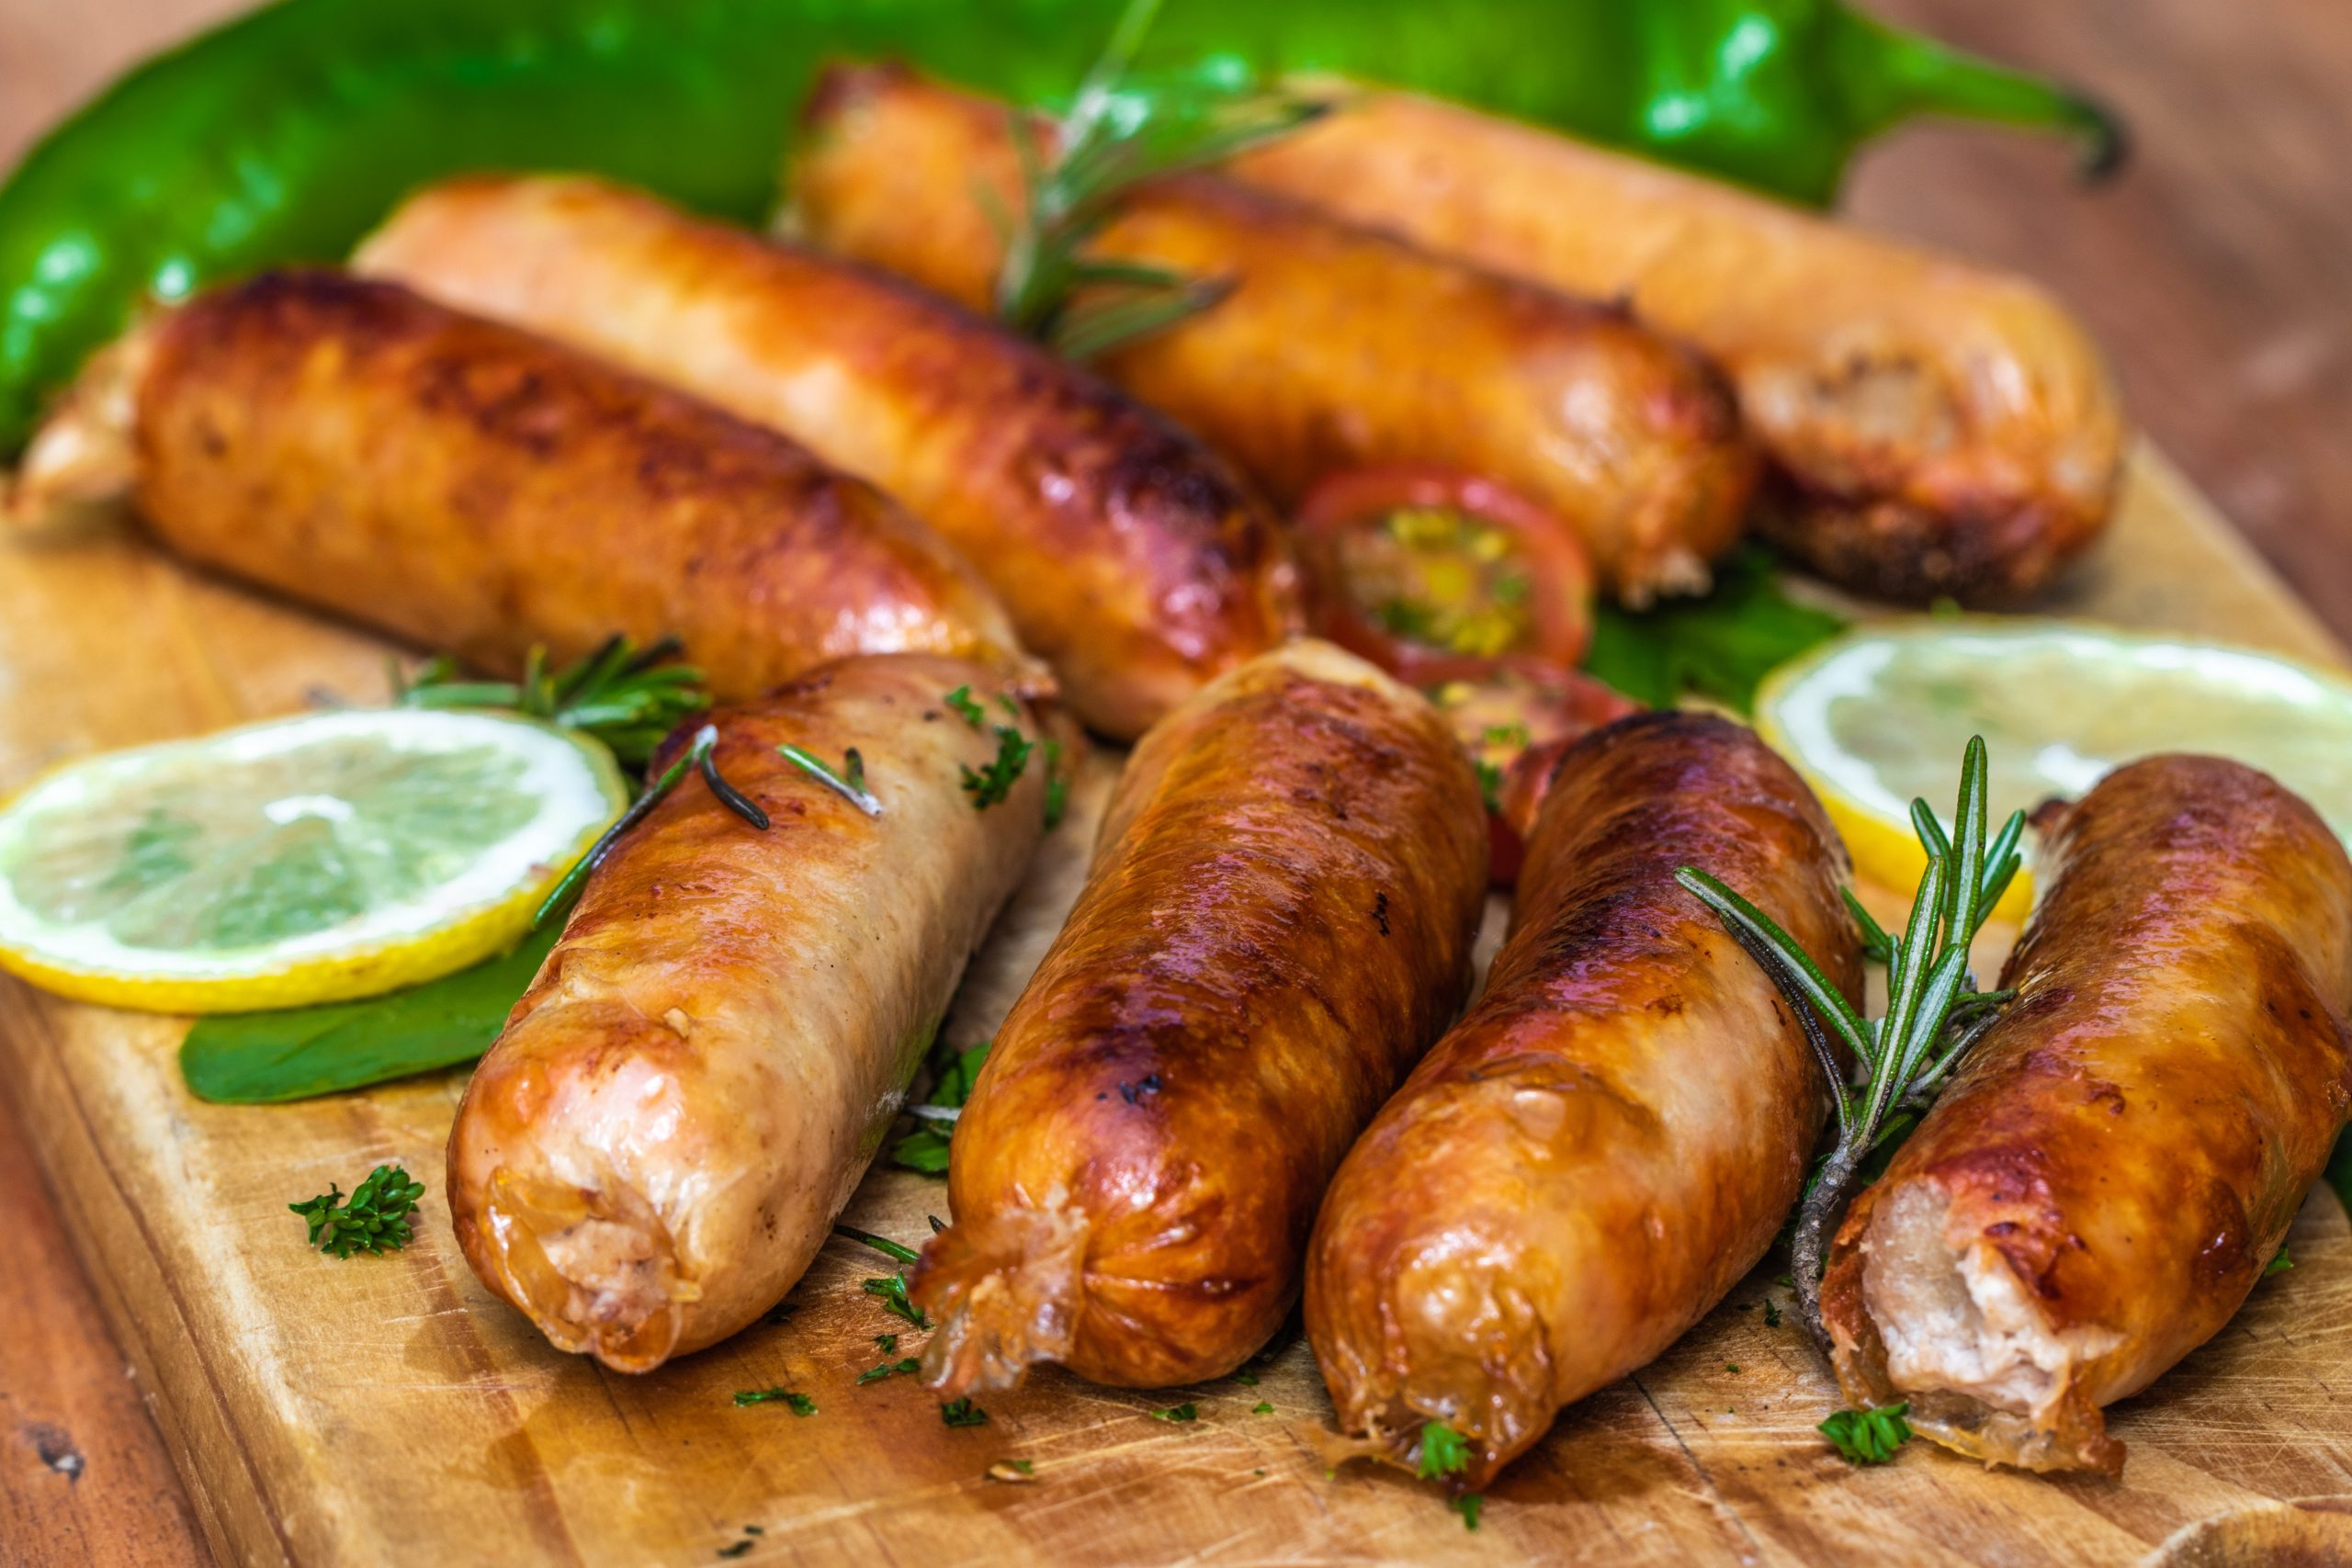 How Long Will Cooked Sausages Last in the Fridge